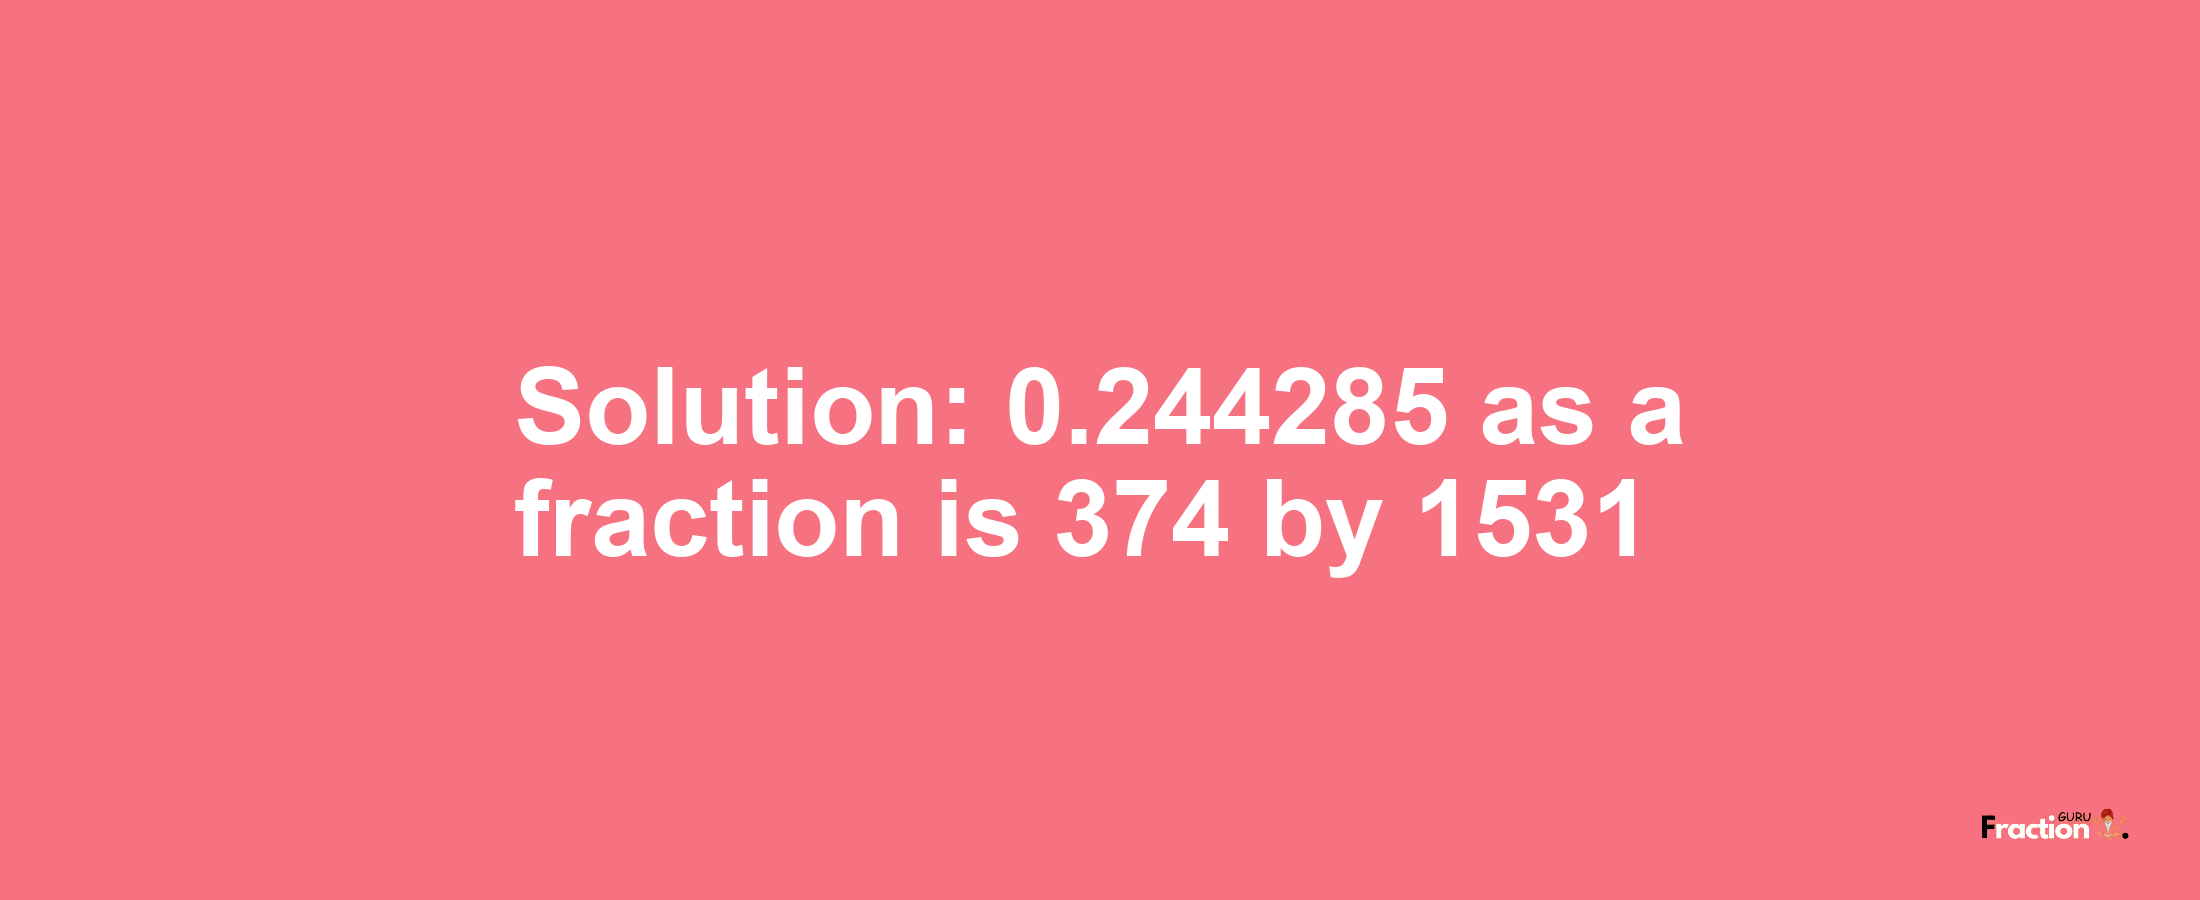 Solution:0.244285 as a fraction is 374/1531